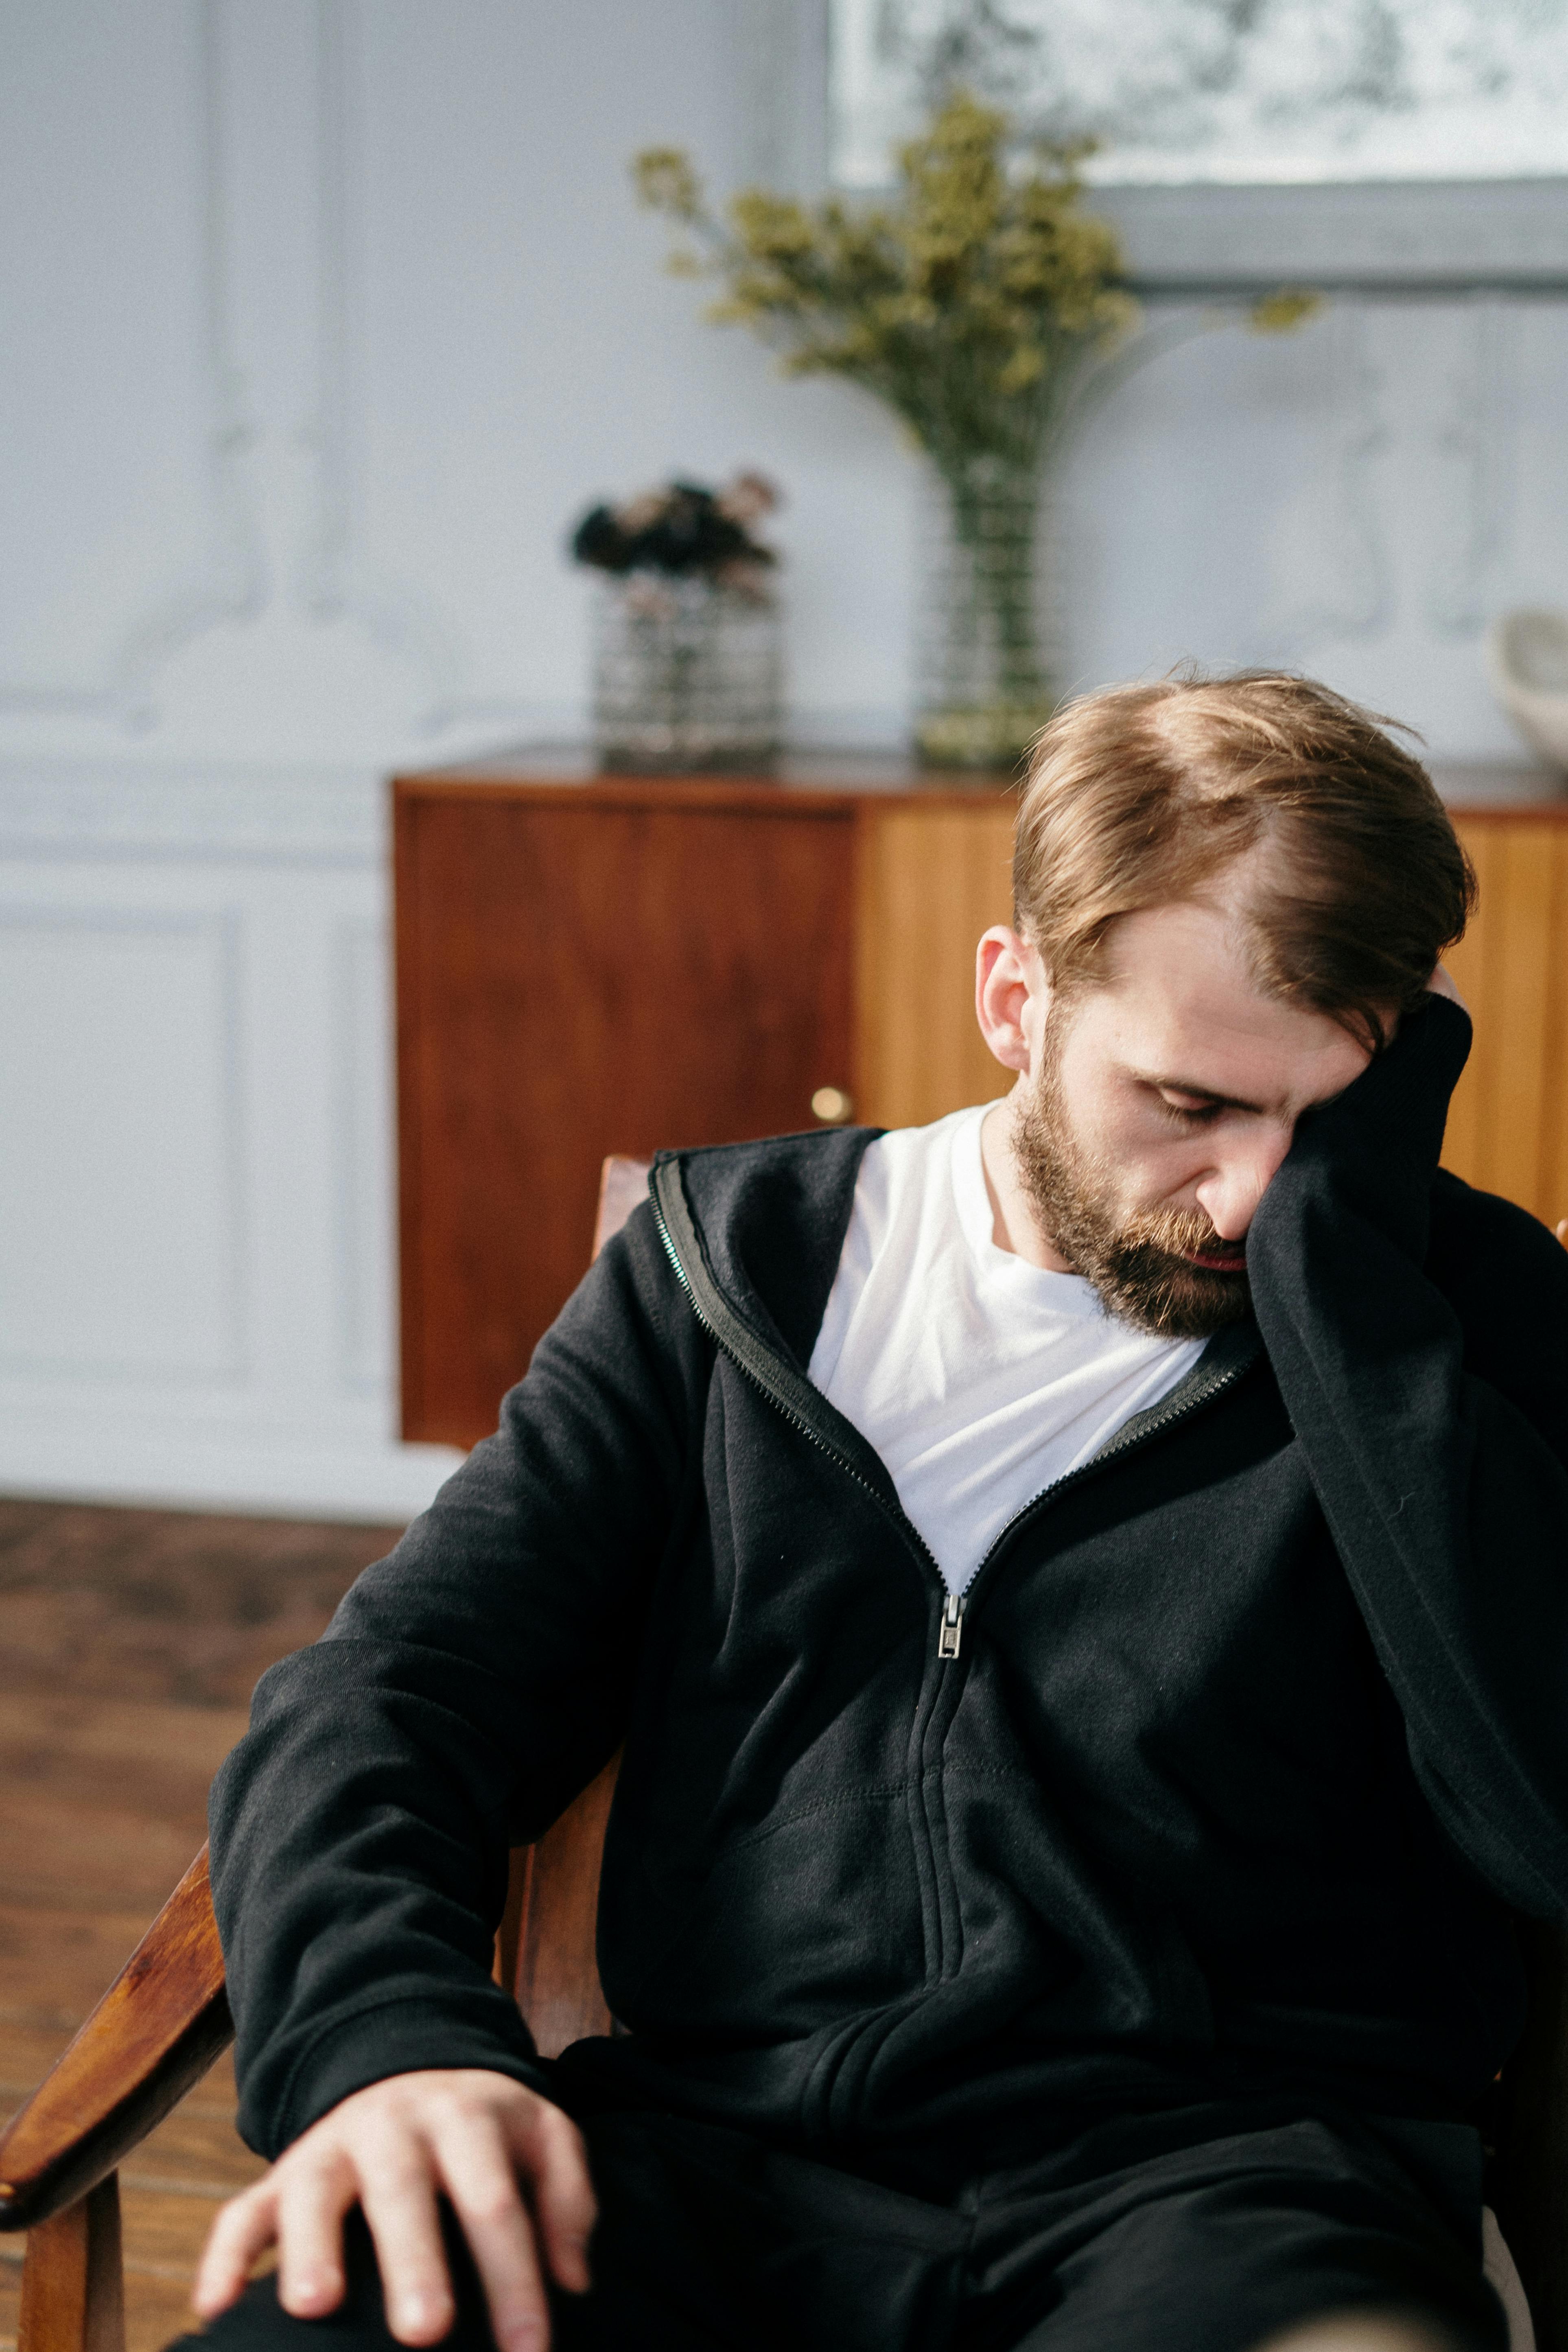 An ashamed and sad man sitting on a chair covering part of his face with his hand | Source: Pexels